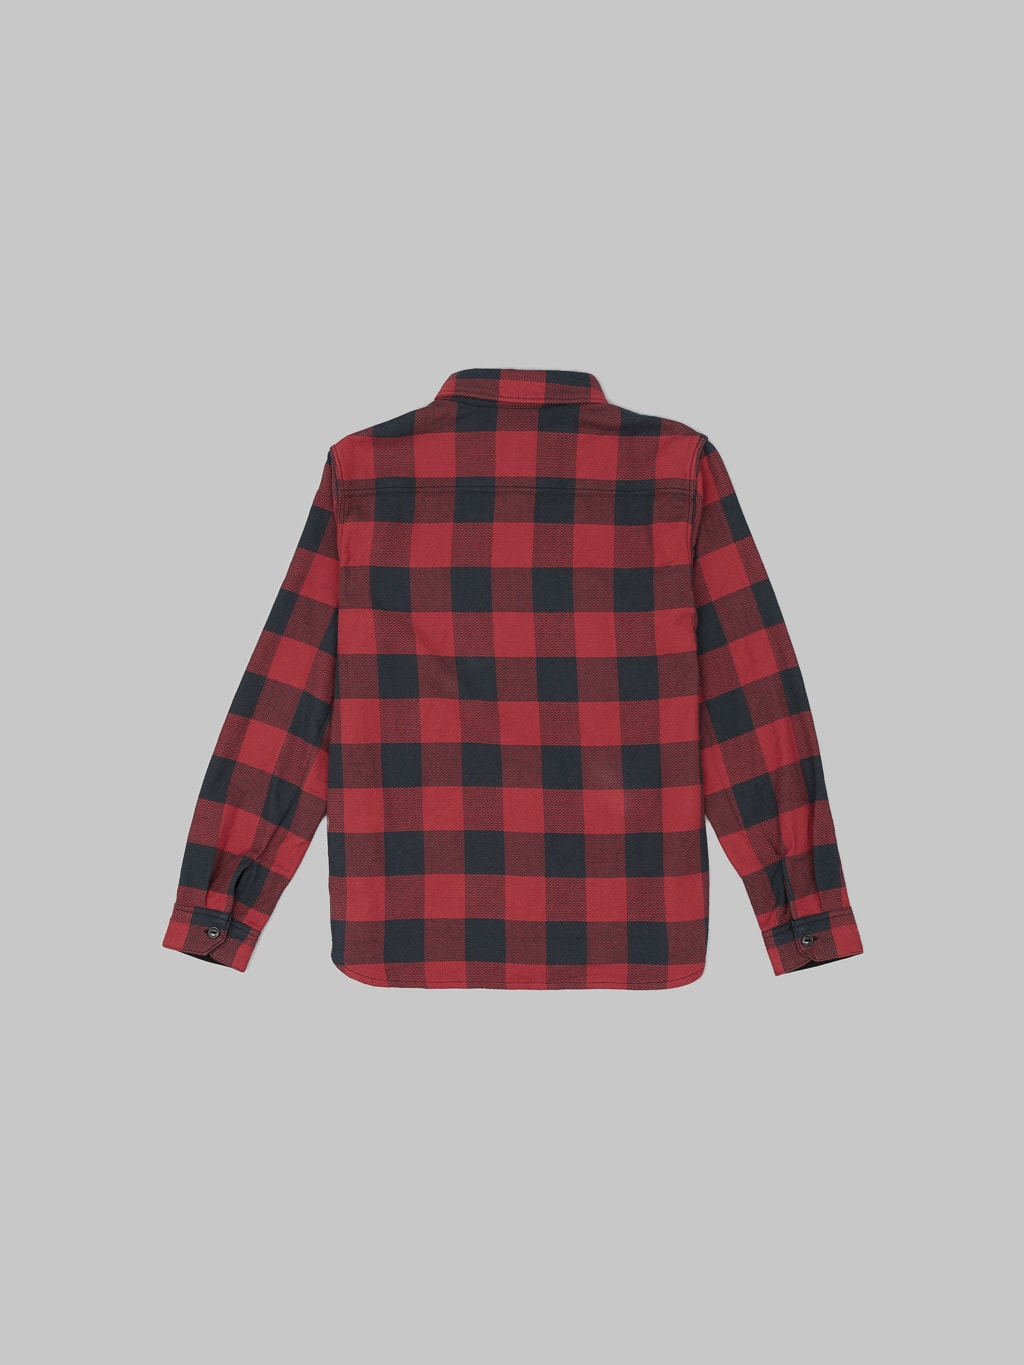 the flat head block check flannel shirt black red back